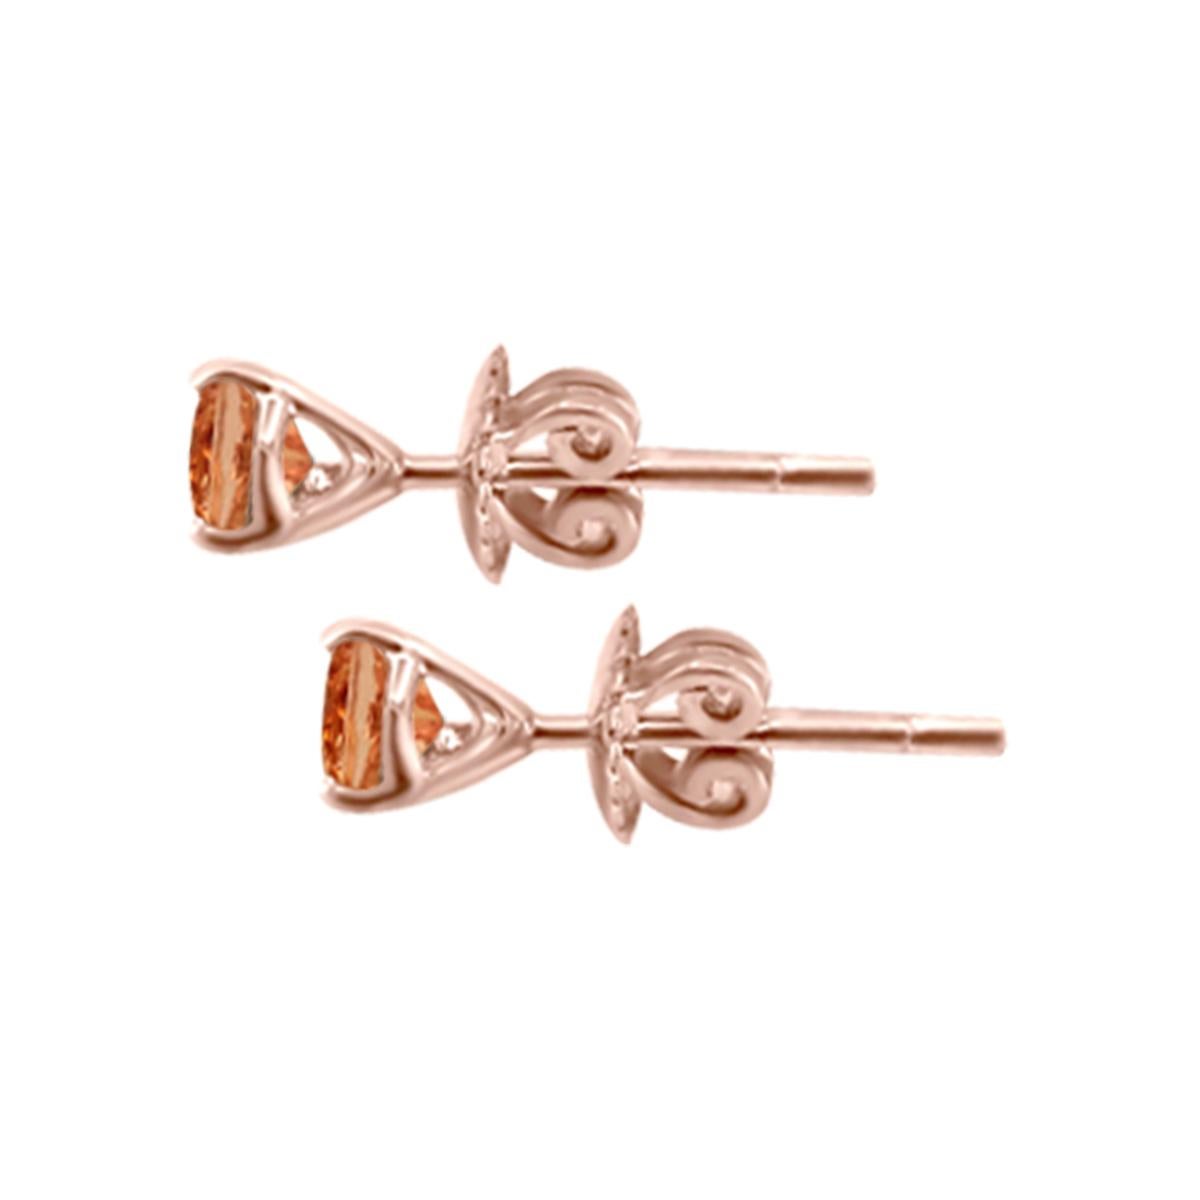 Add A Soft Touch Of Love To Your Everyday Look With This Blush Pair Of Stud Earrings.
These Stud Earring Features Perfect 4MM Round Morganite Gemstone Prong Set In 14k Rose Gold .
Perfect For A Day Or Evening Out. It Can Be Purchased As Gift For